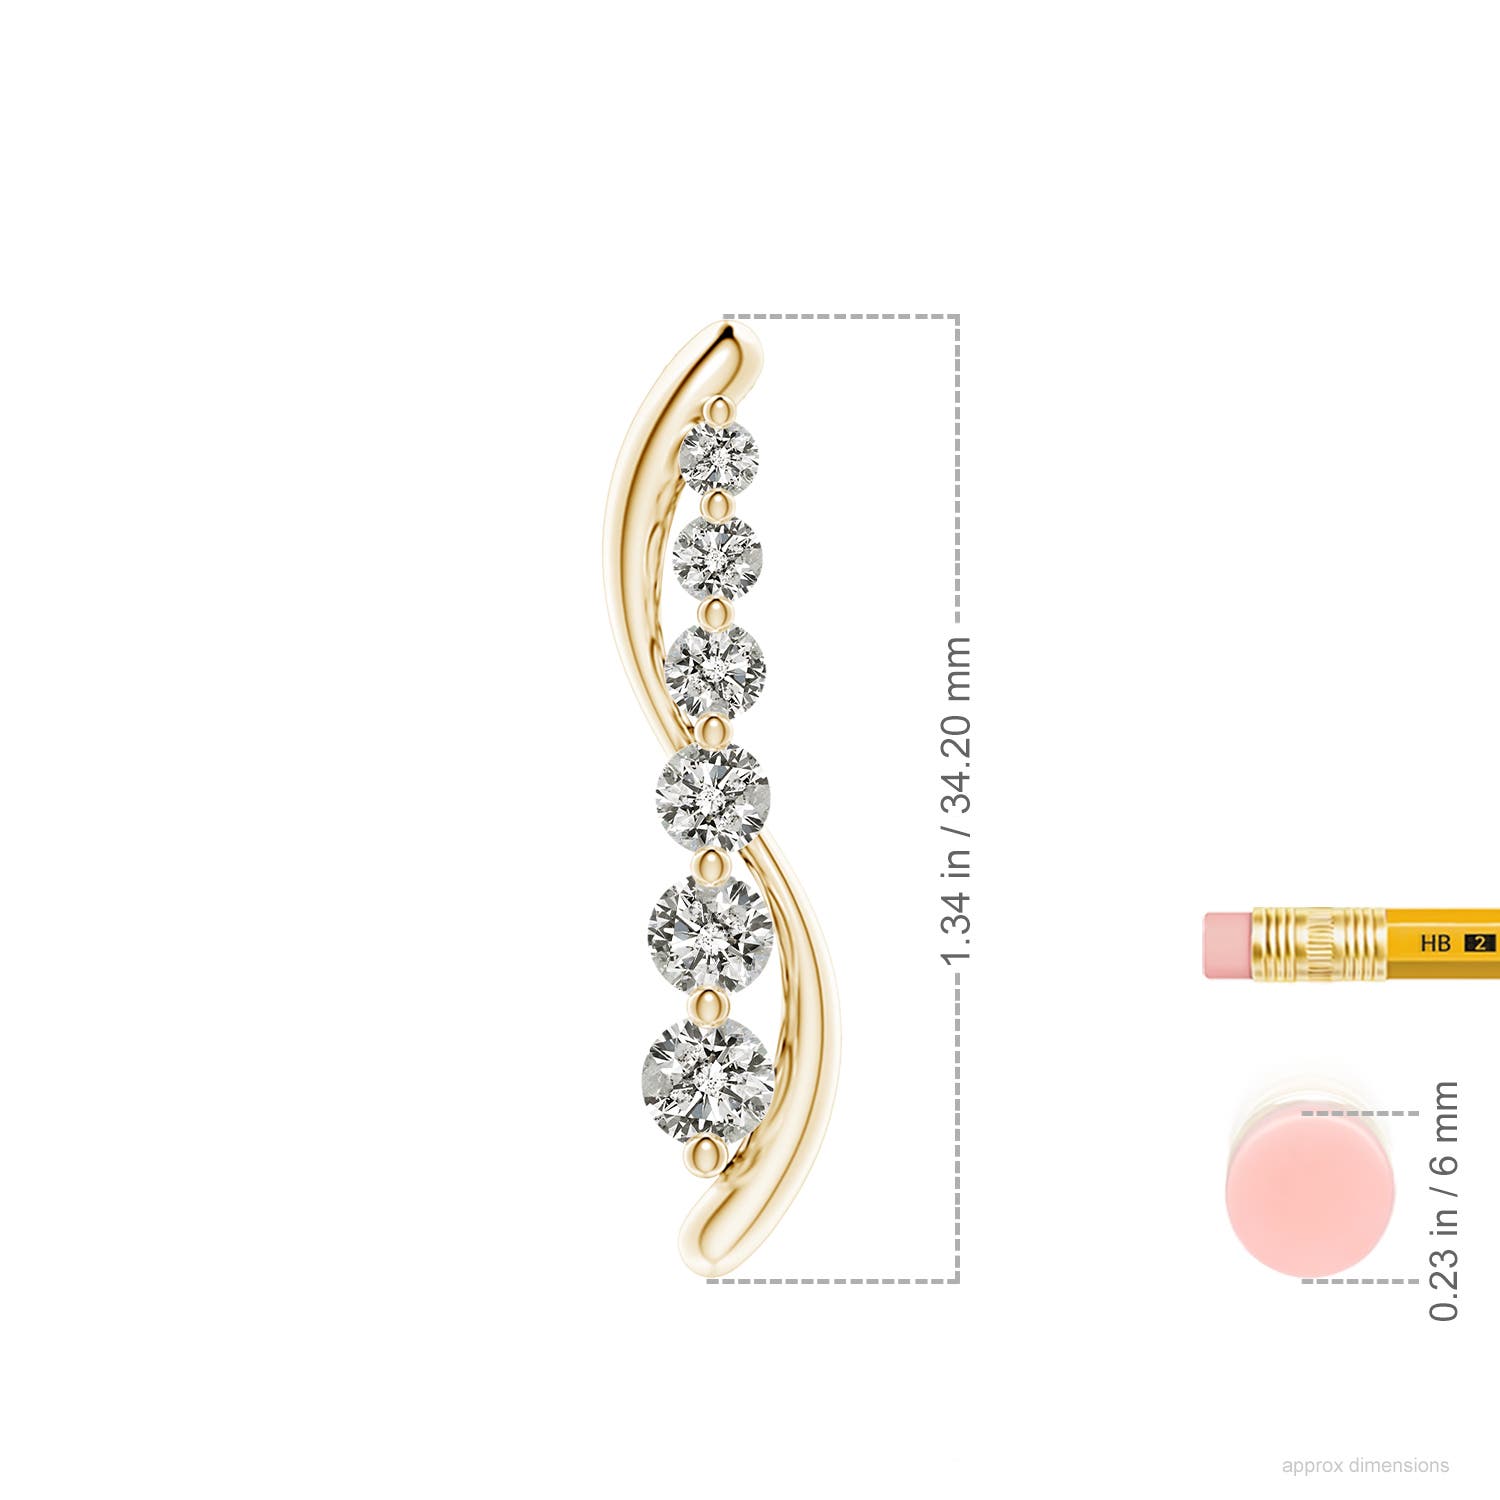 K, I3 / 1.38 CT / 18 KT Yellow Gold